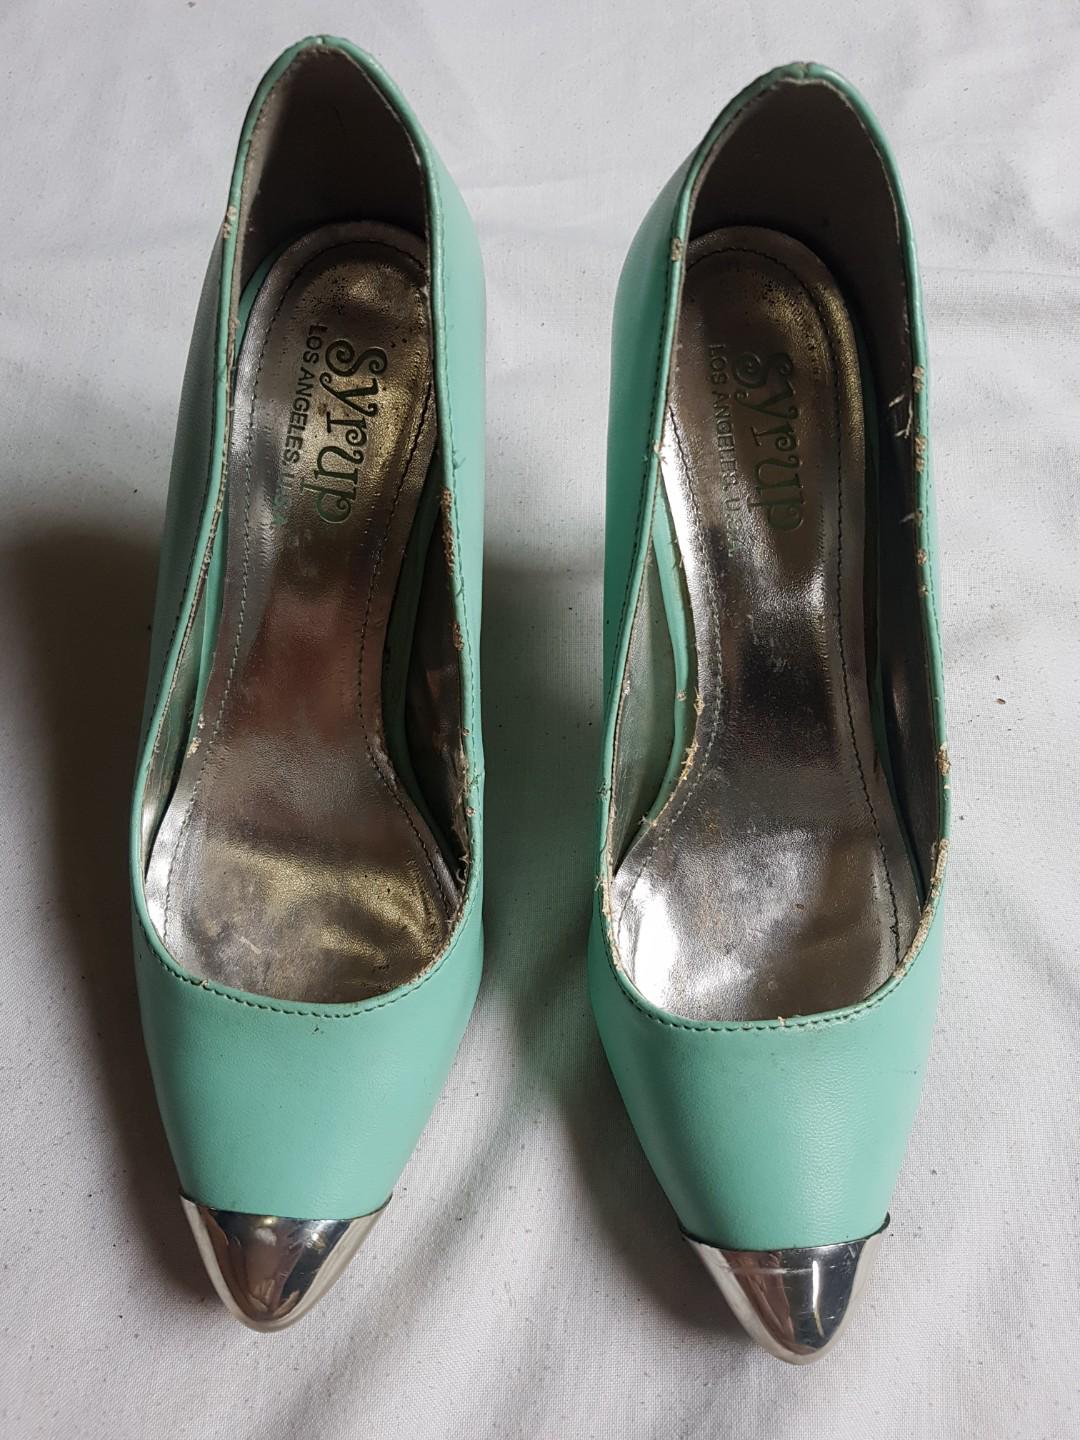 green pointed toe pumps